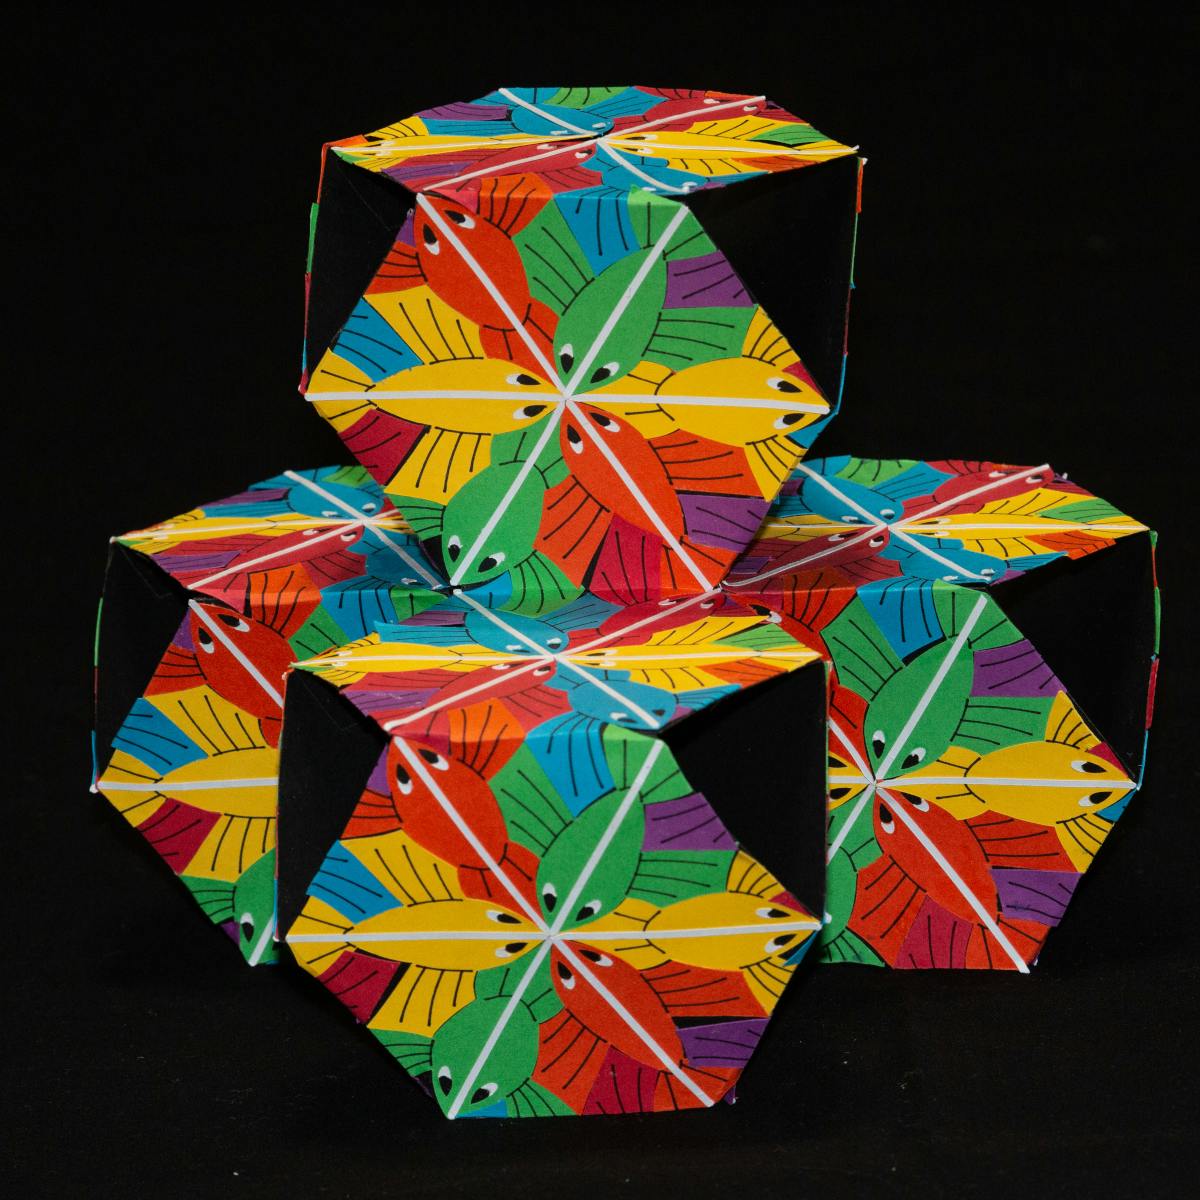 Image for entry 'Escher-inspired Fish on the {6,6|3} Polyhedron'